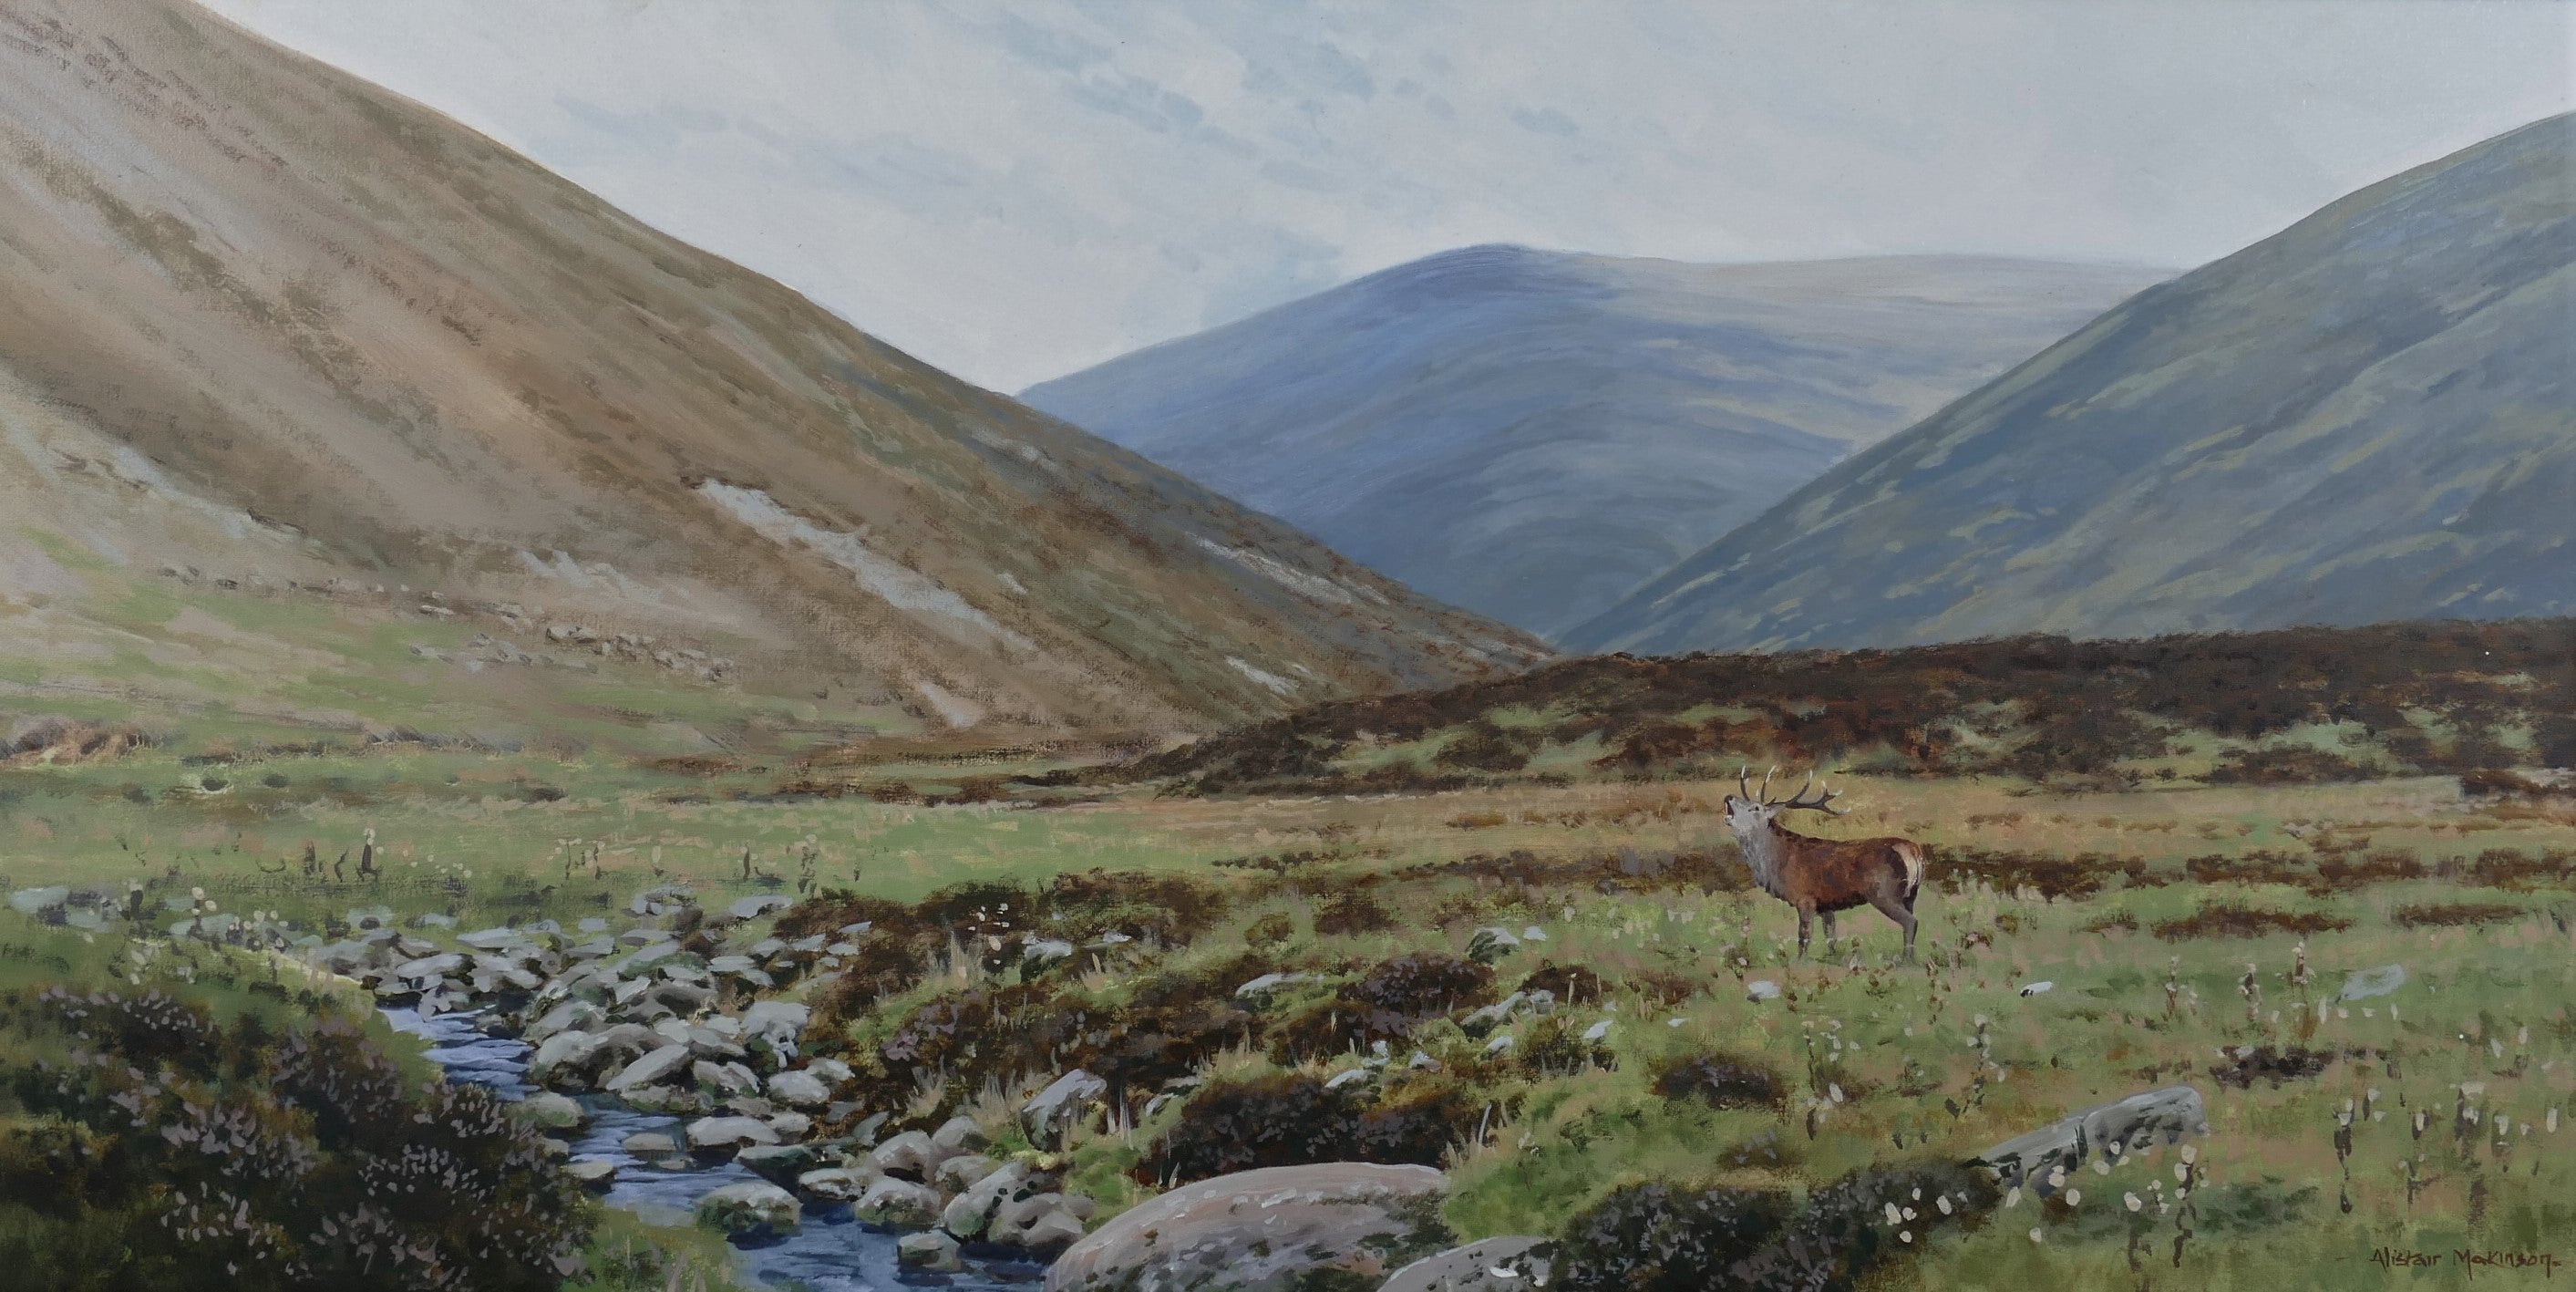 'Rutting Stag' - Original Oil Painting by Alistair Makinson - 40 x 80cm